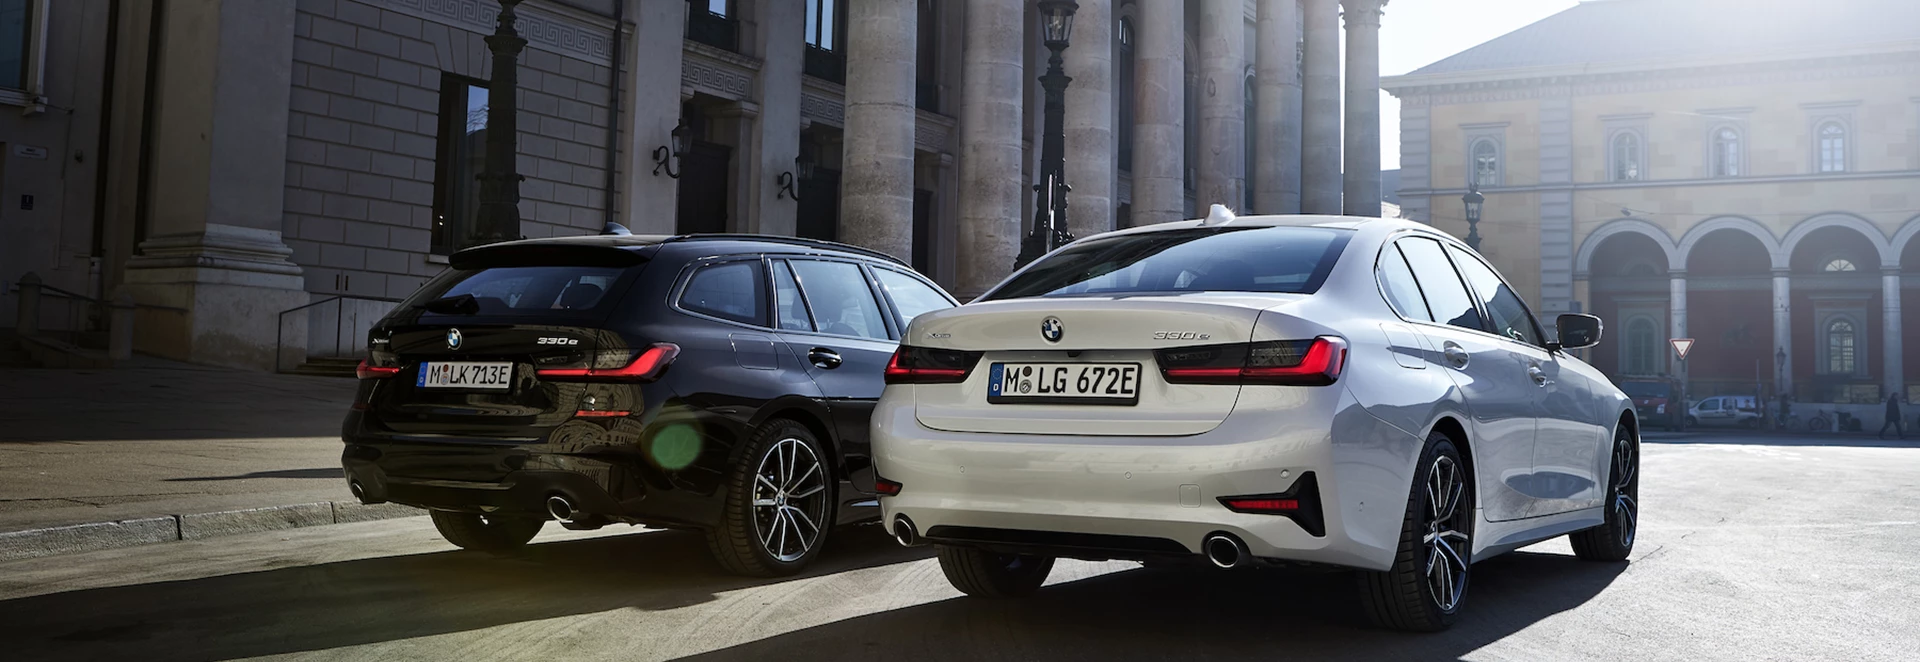 New plug-in hybrids join the BMW 3 Series range